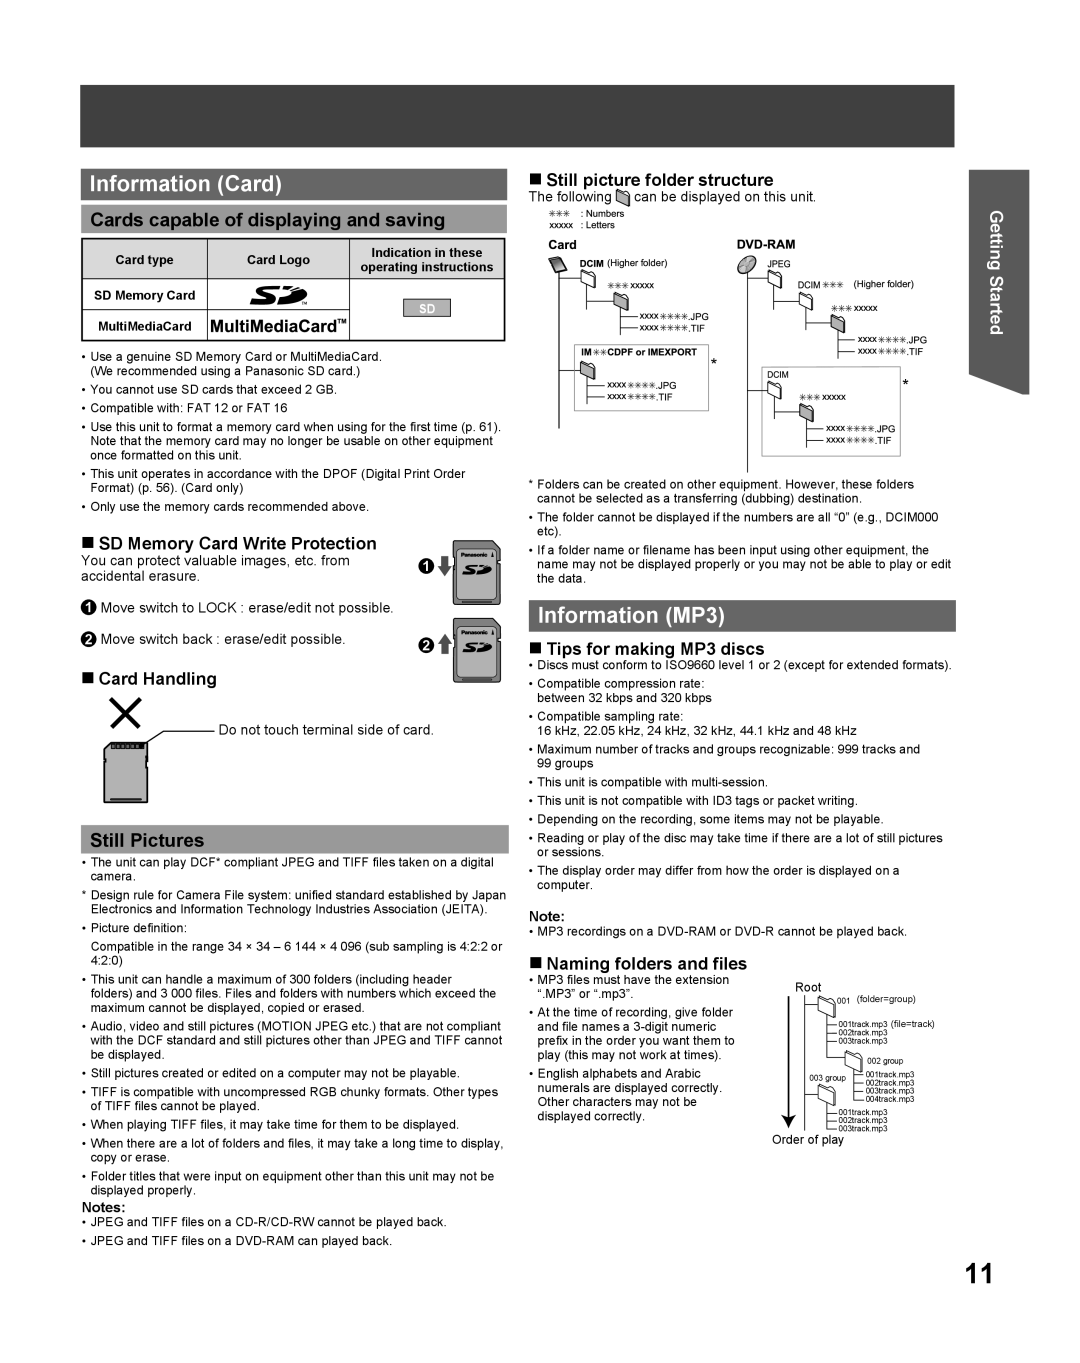 Panasonic TC 22LR30 manual Information Card, Information MP3, Cards capable of displaying and saving, Still Pictures 